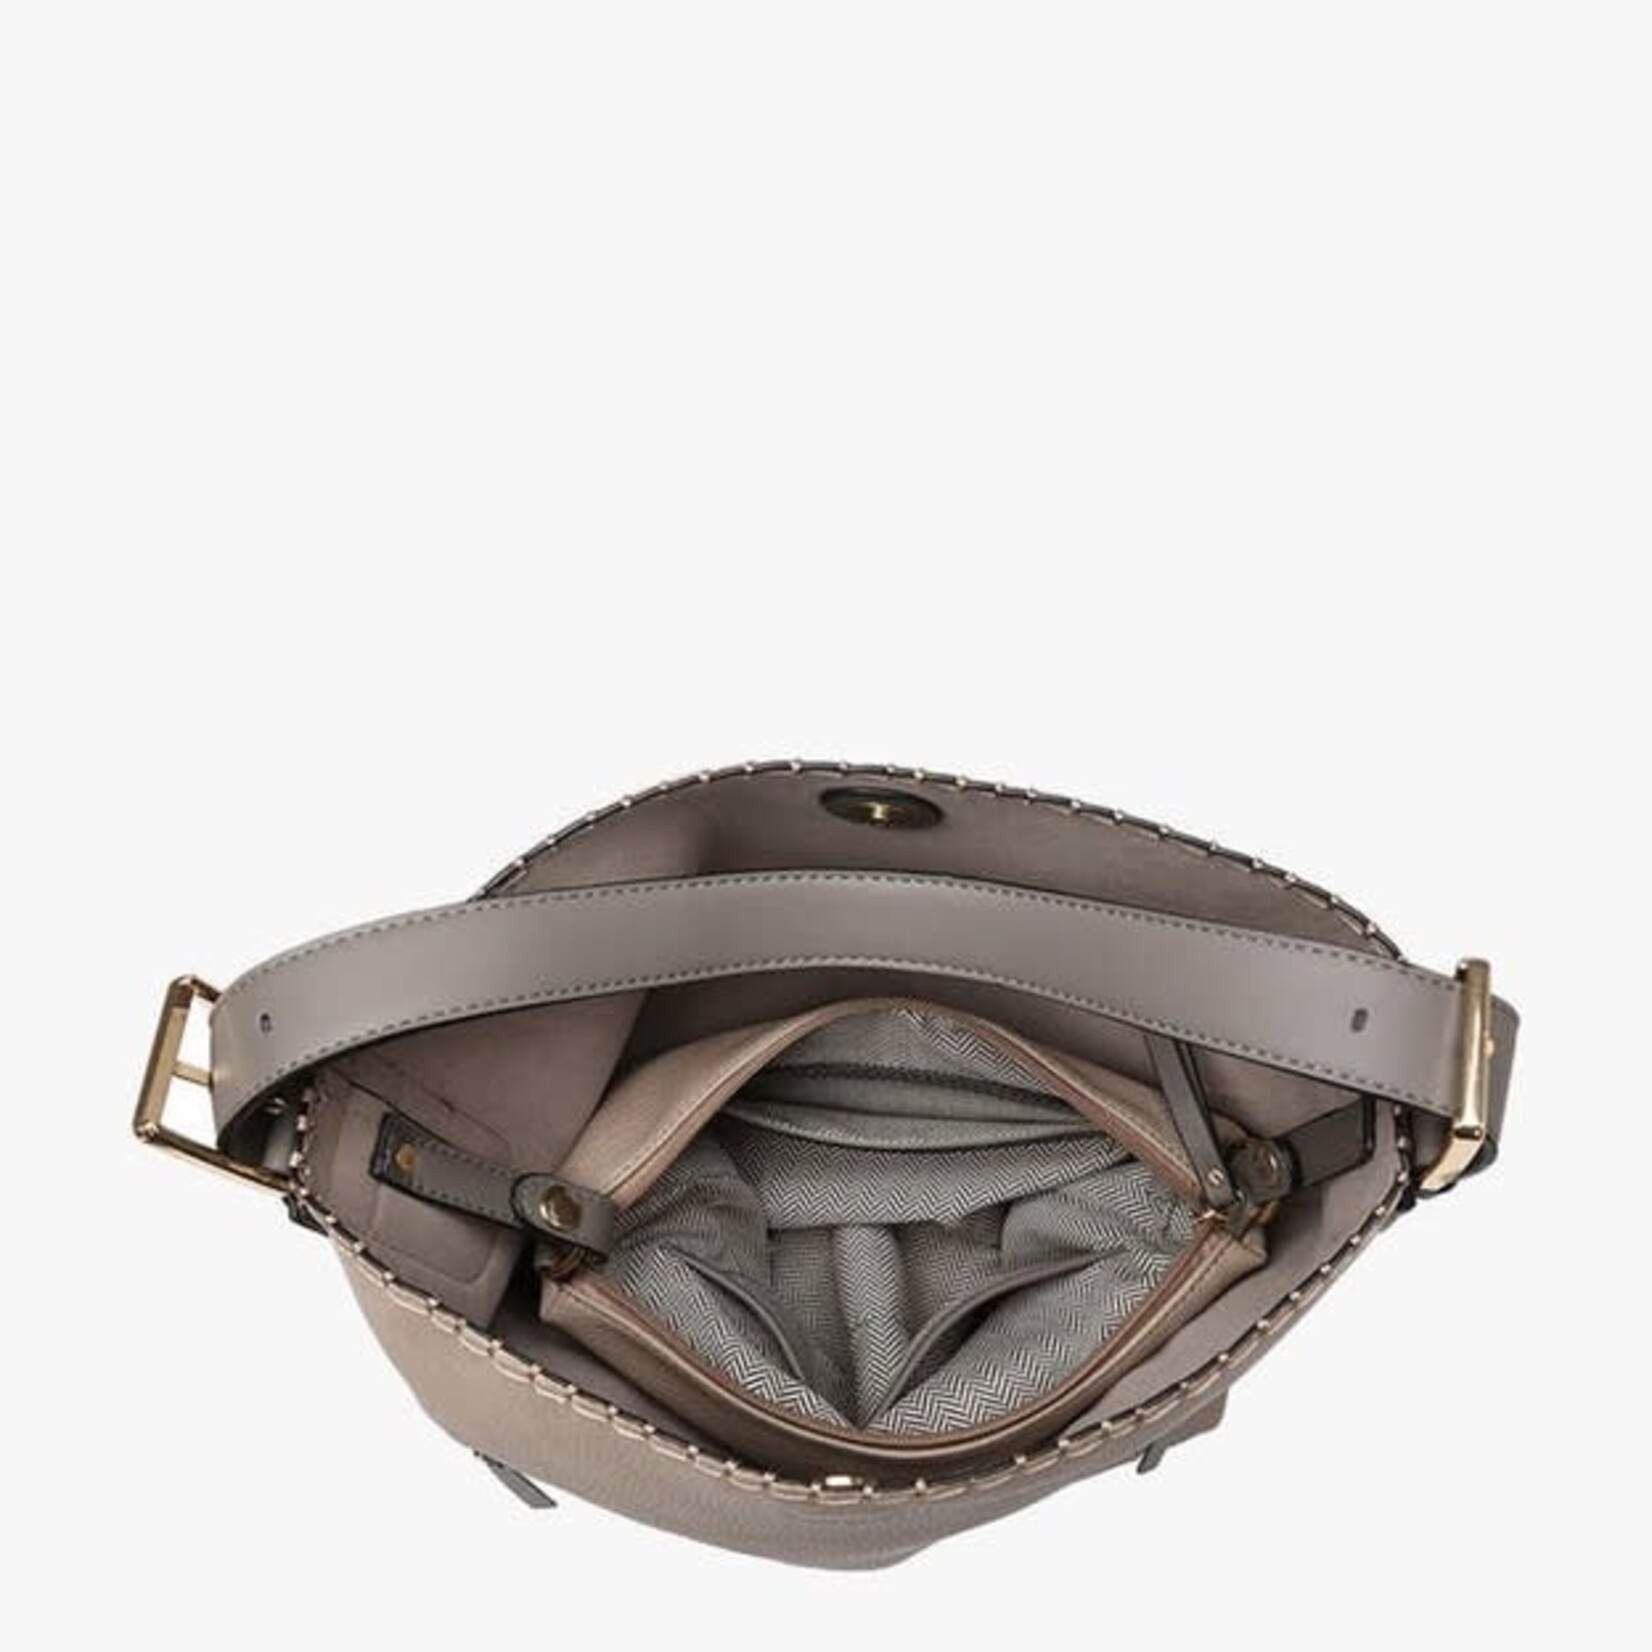 Jen & Co Alexa 2-in-1  Hobo Bag in a Bag with Dual Zip Compartments- Fog Grey